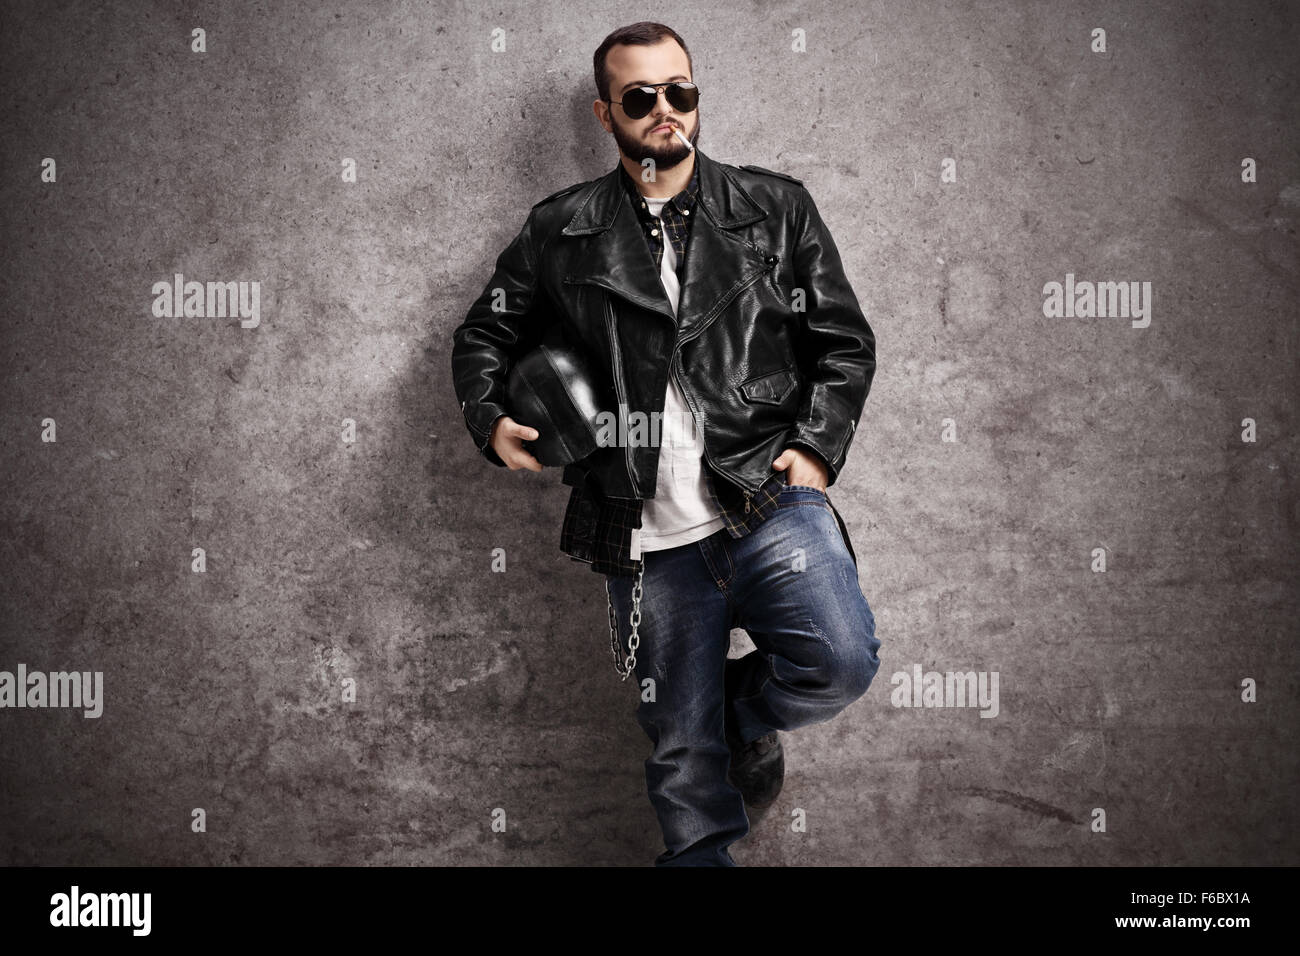 Young male biker in a leather jacket smoking a cigarette and leaning against a rusty gray wall Stock Photo